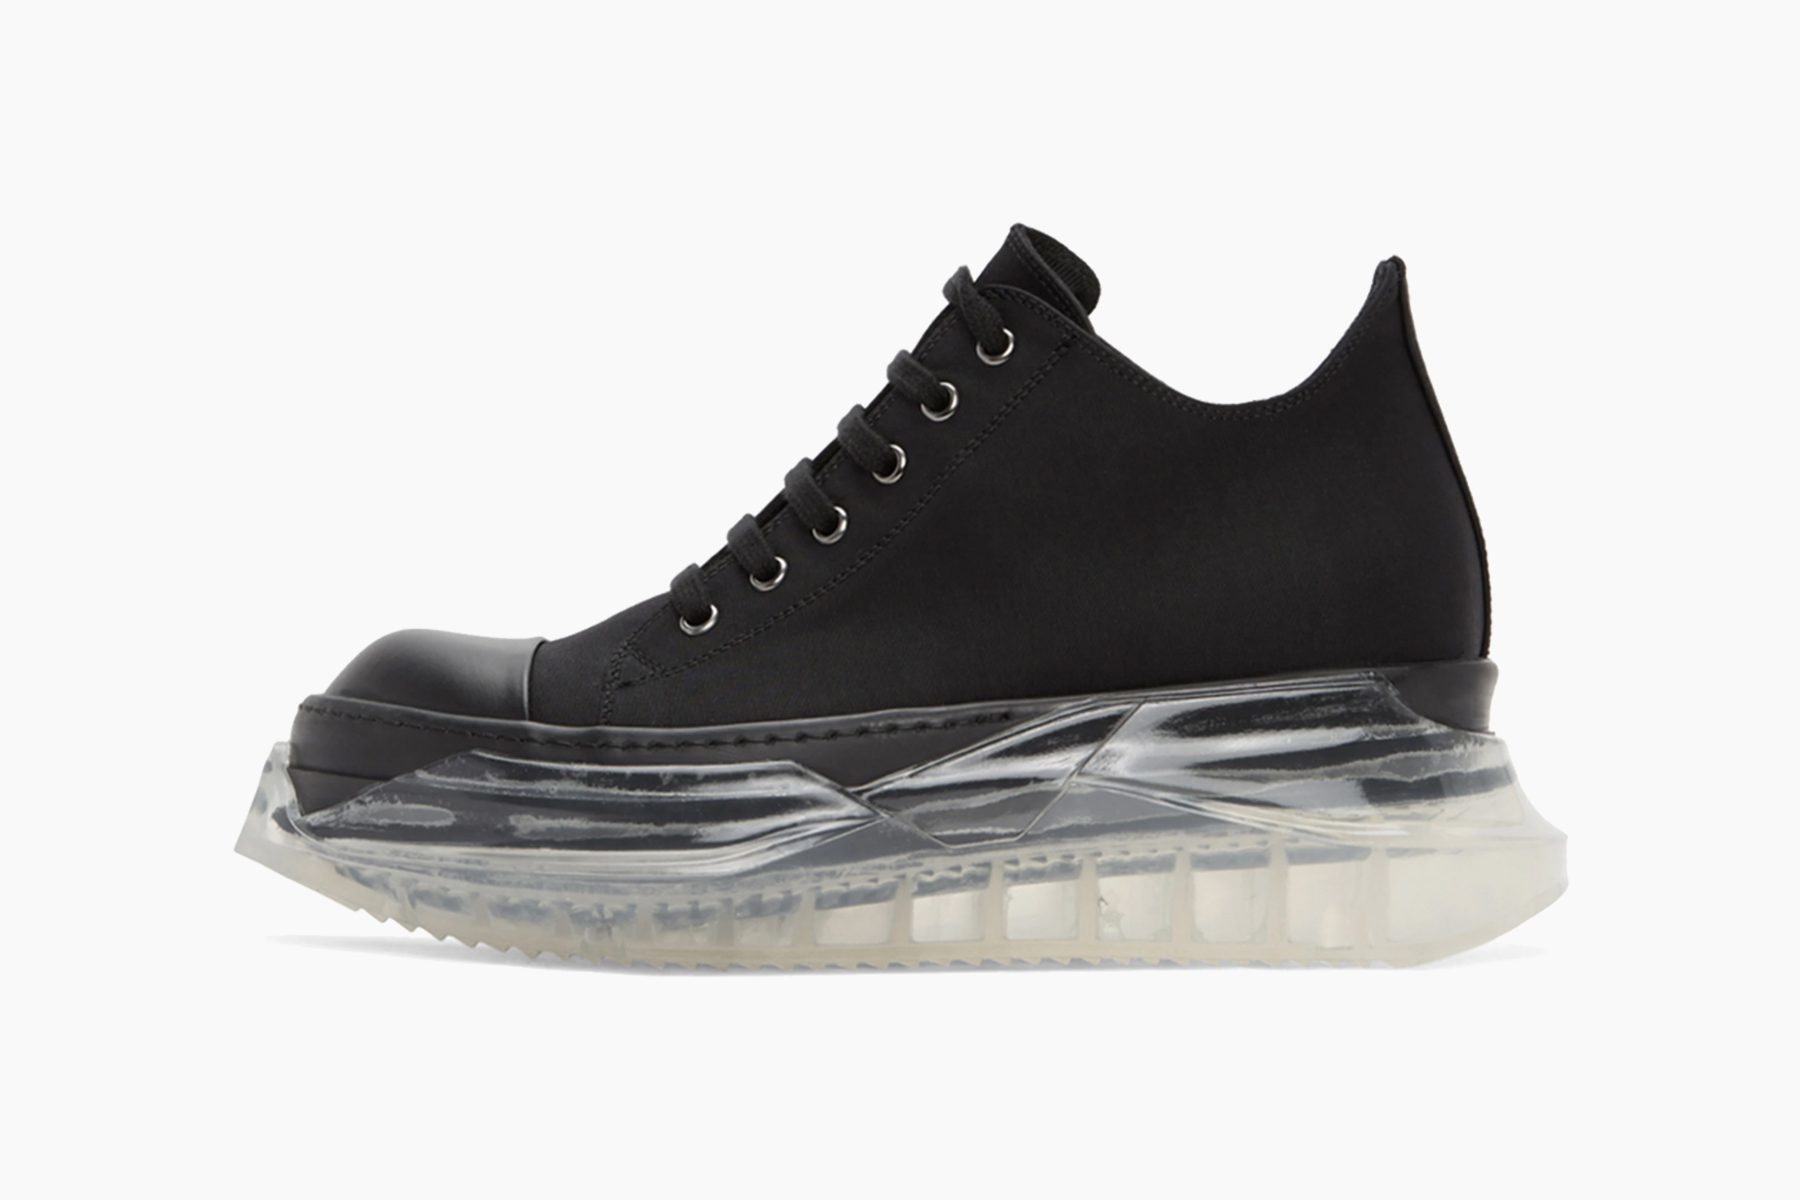 Rick Owens DRKSHDW's Abstract Sneakers Features a Chunky Transparent Outsole